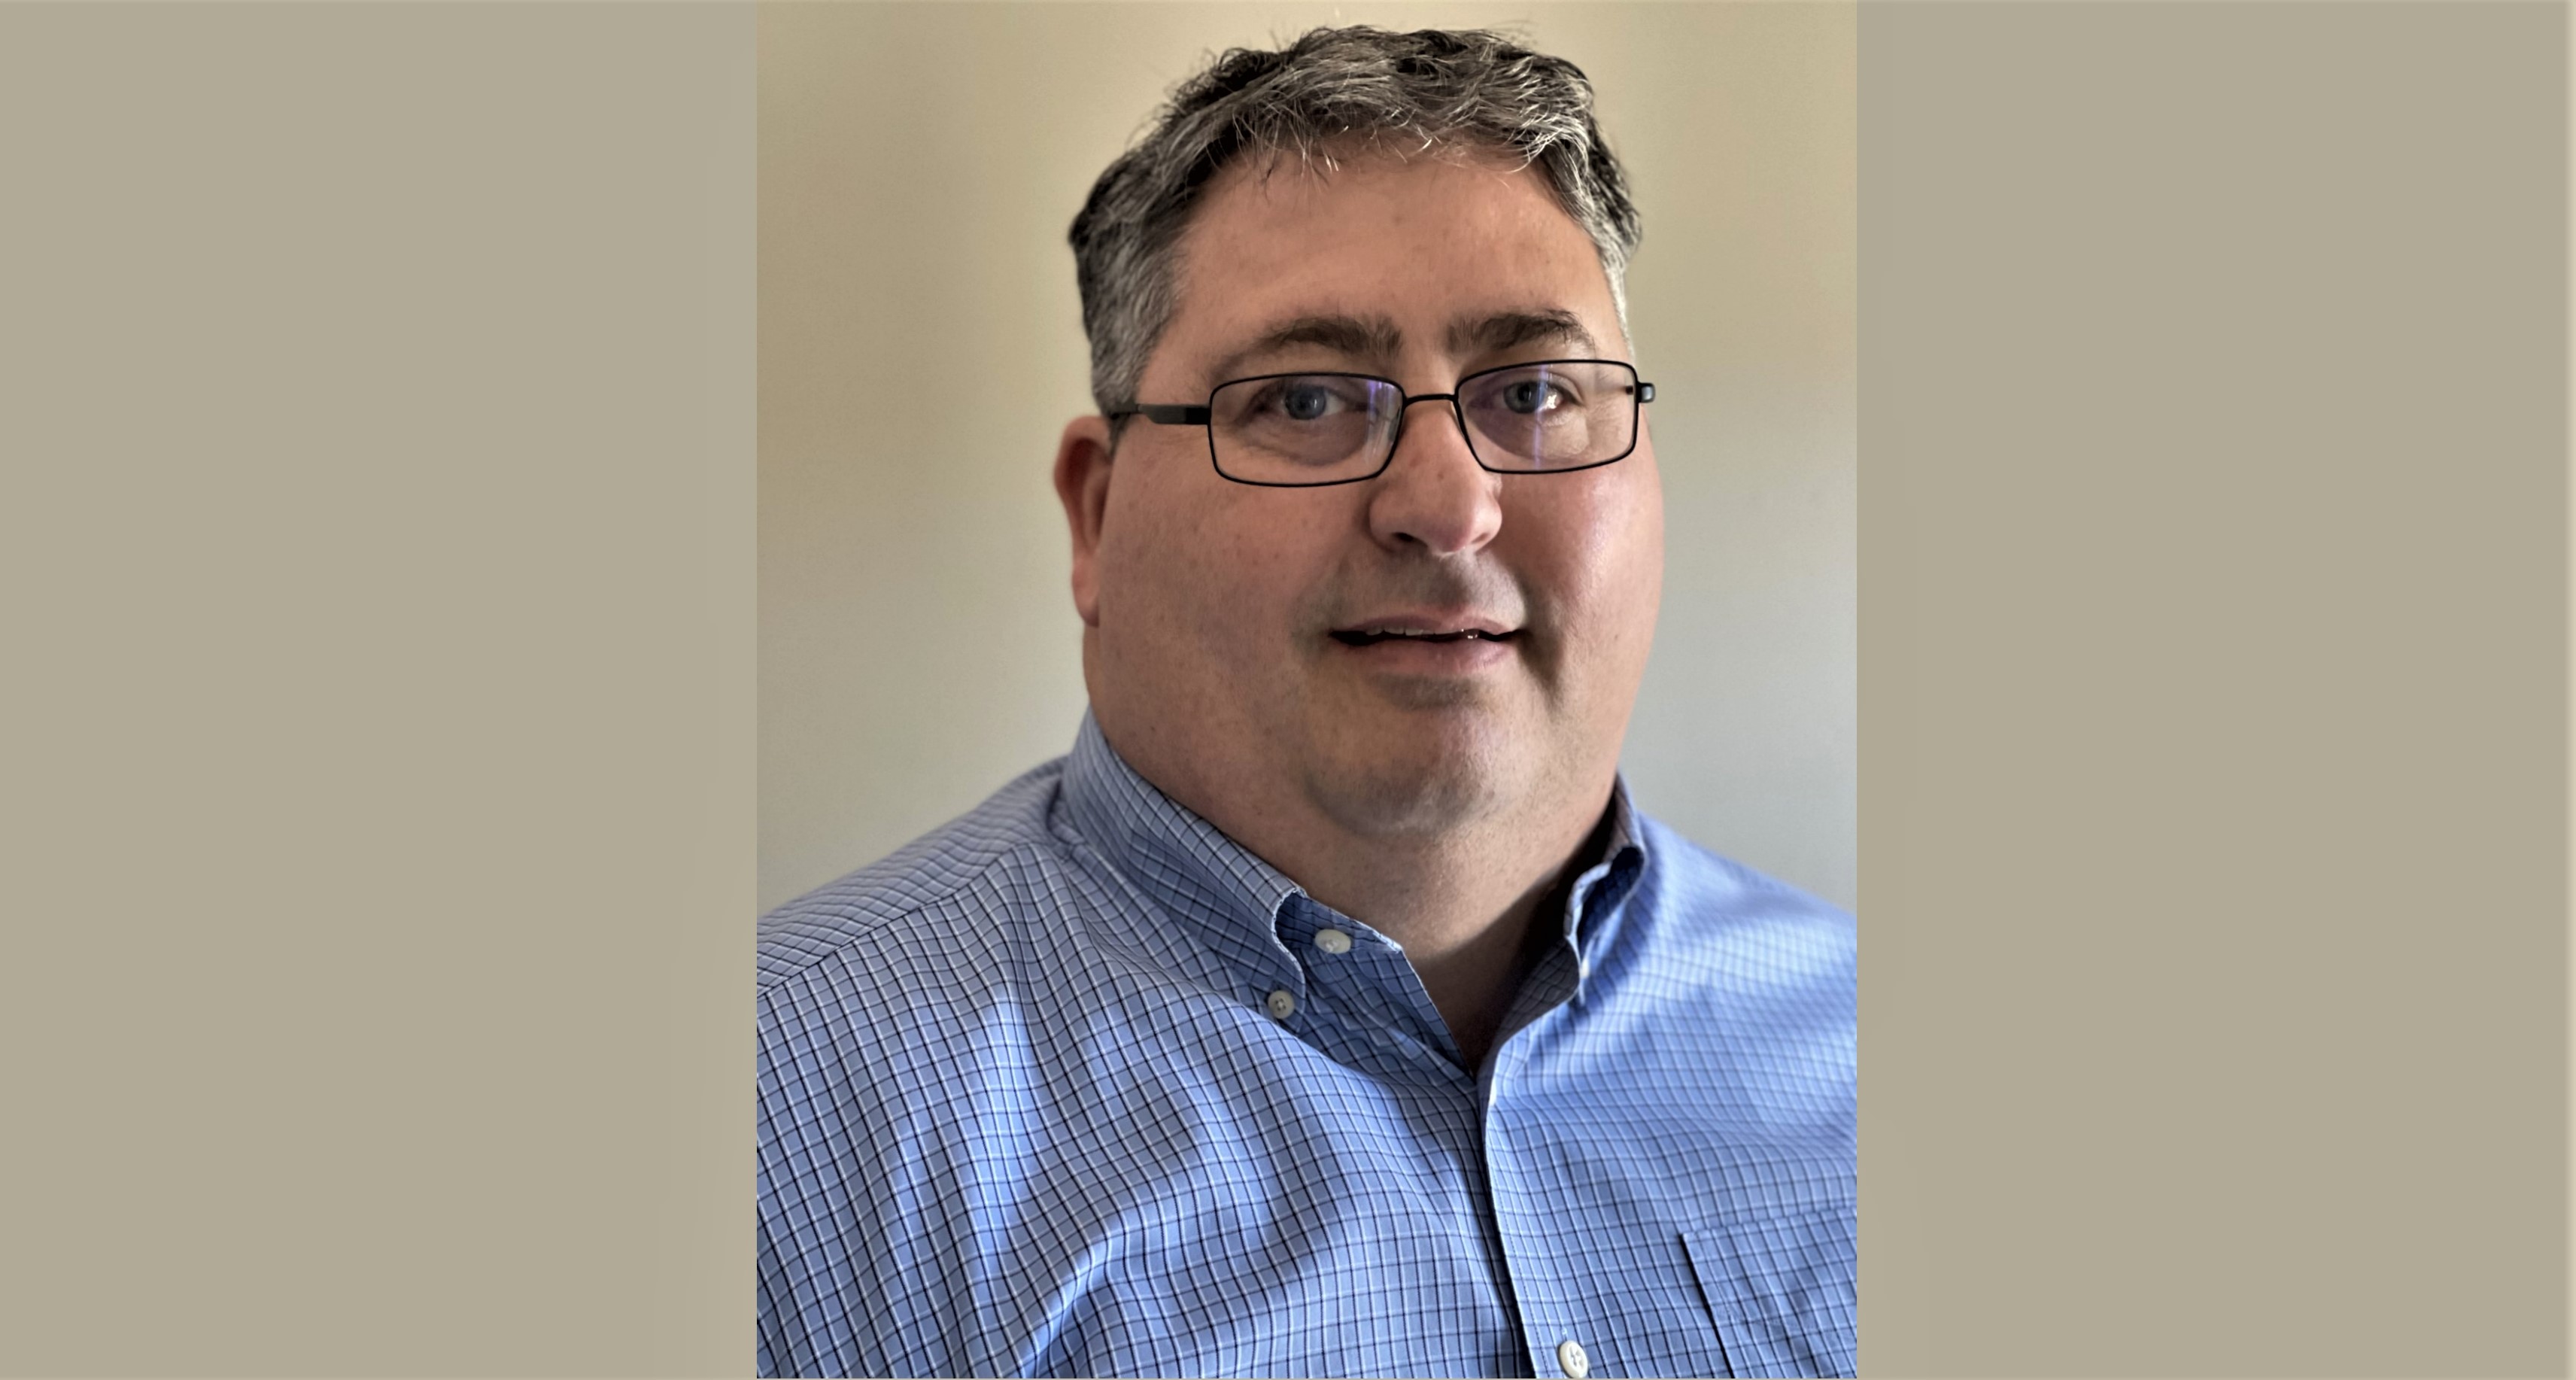 Hyland Hires Will Milewski as Senior Vice President of Cloud Infrastructure and Operations